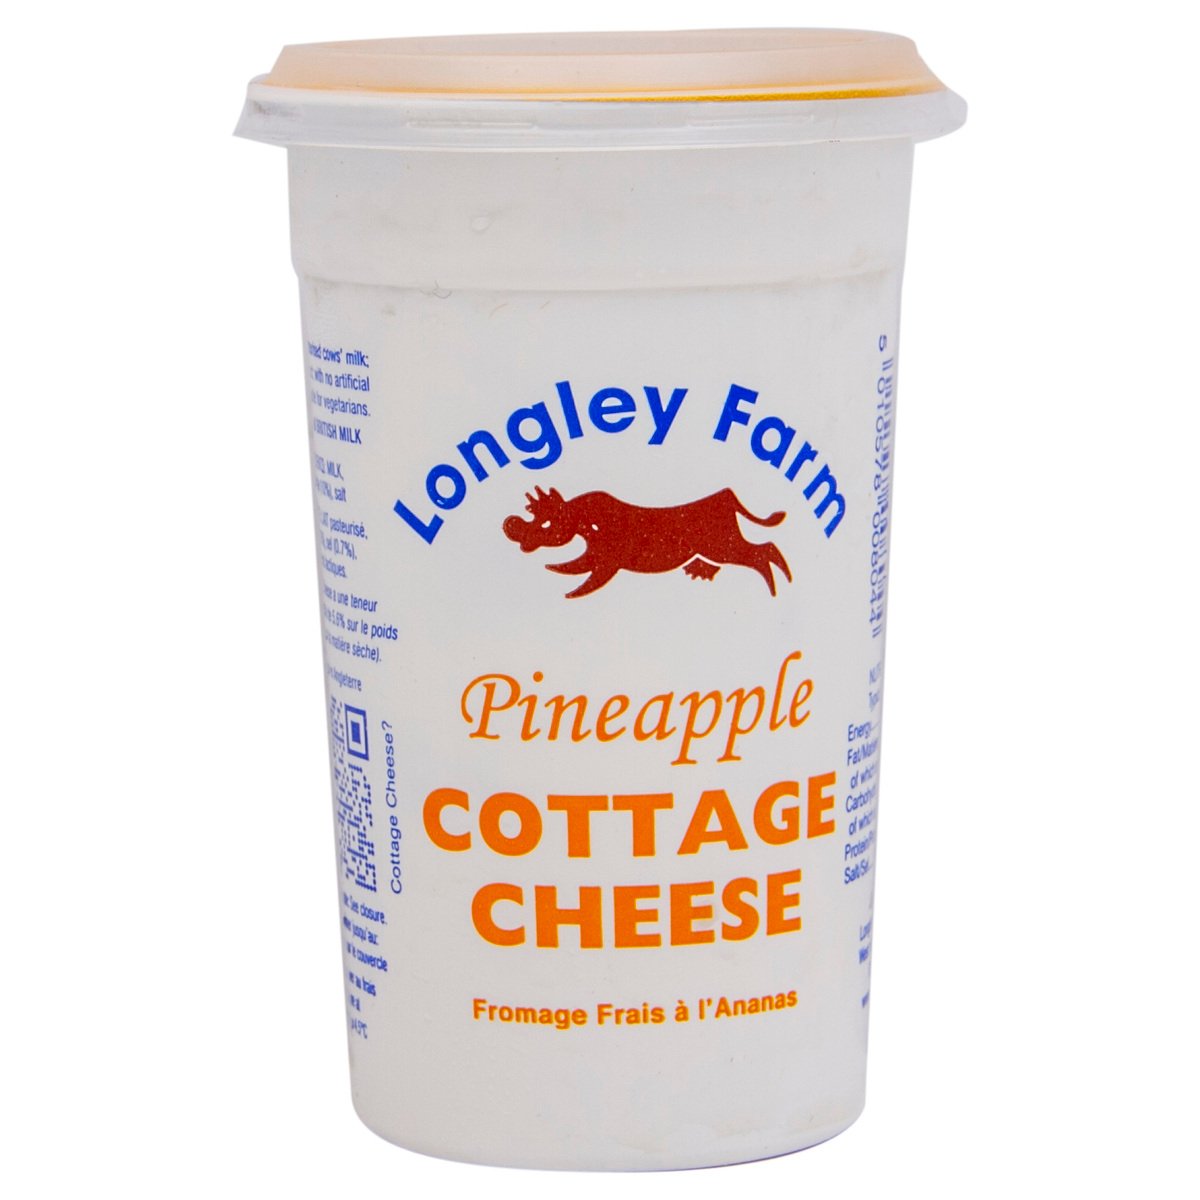 Longley Farm Pineapple Cottage Cheese 250 g